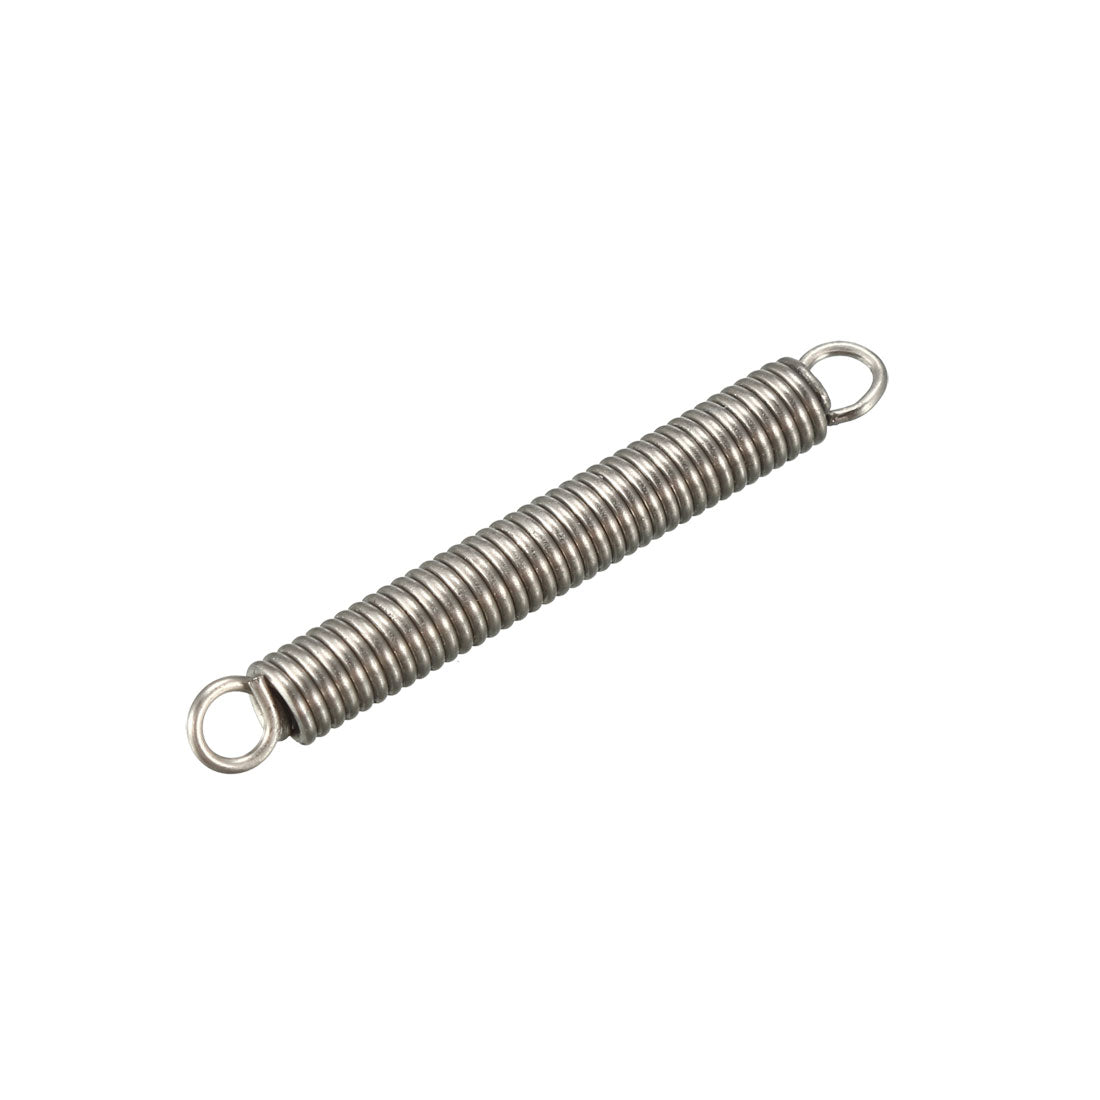 uxcell Uxcell Extended Tension Spring Wire Diameter 0.02", OD 0.12", Free Length 0.98" 10pcs